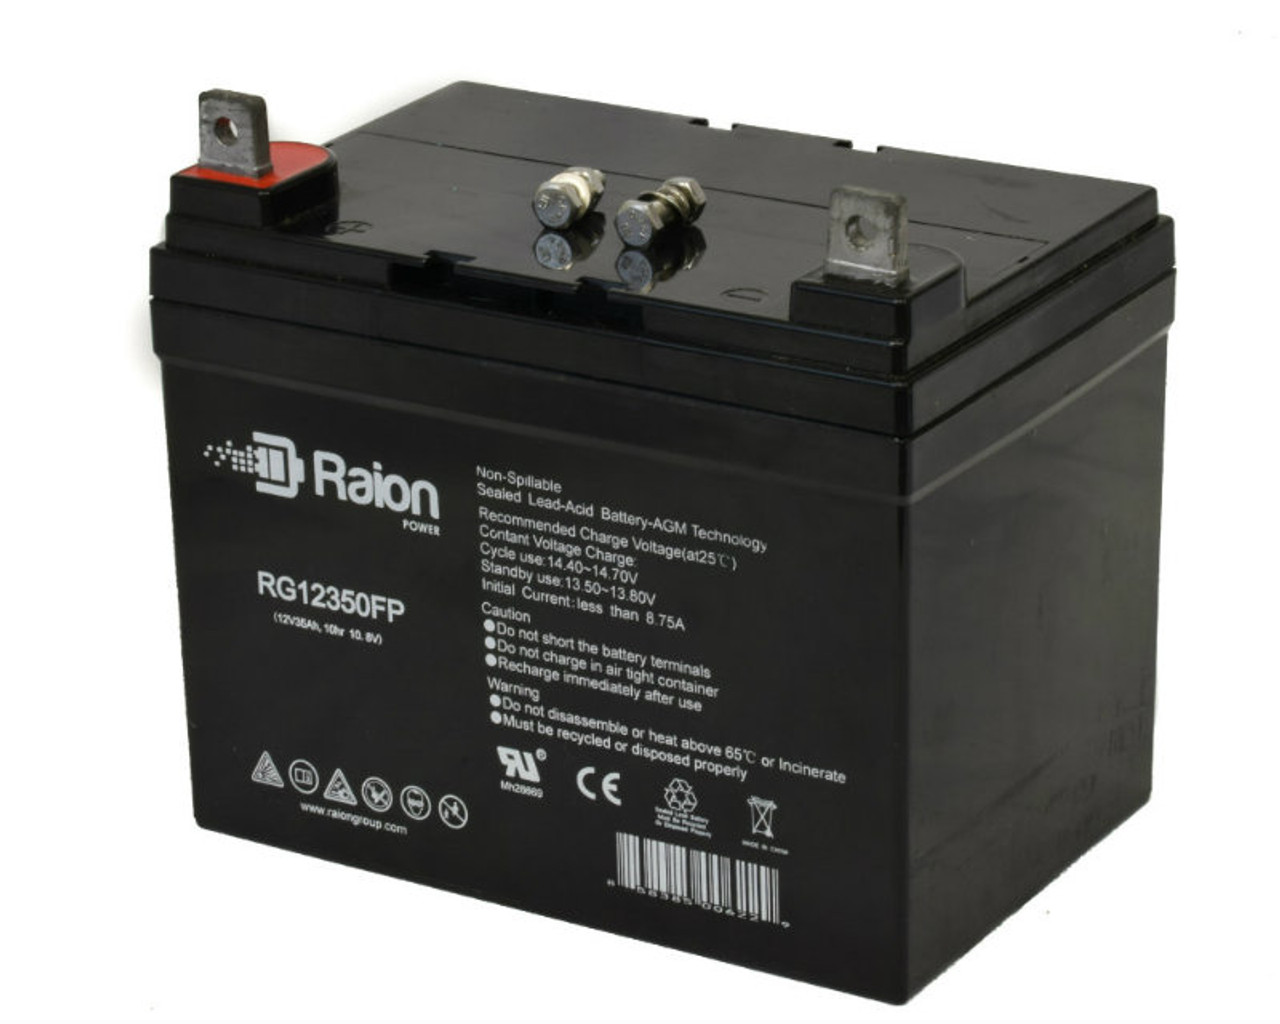 Raion Power Replacement 12V 35Ah RG12350FP Battery for Toro 415 HYDRO